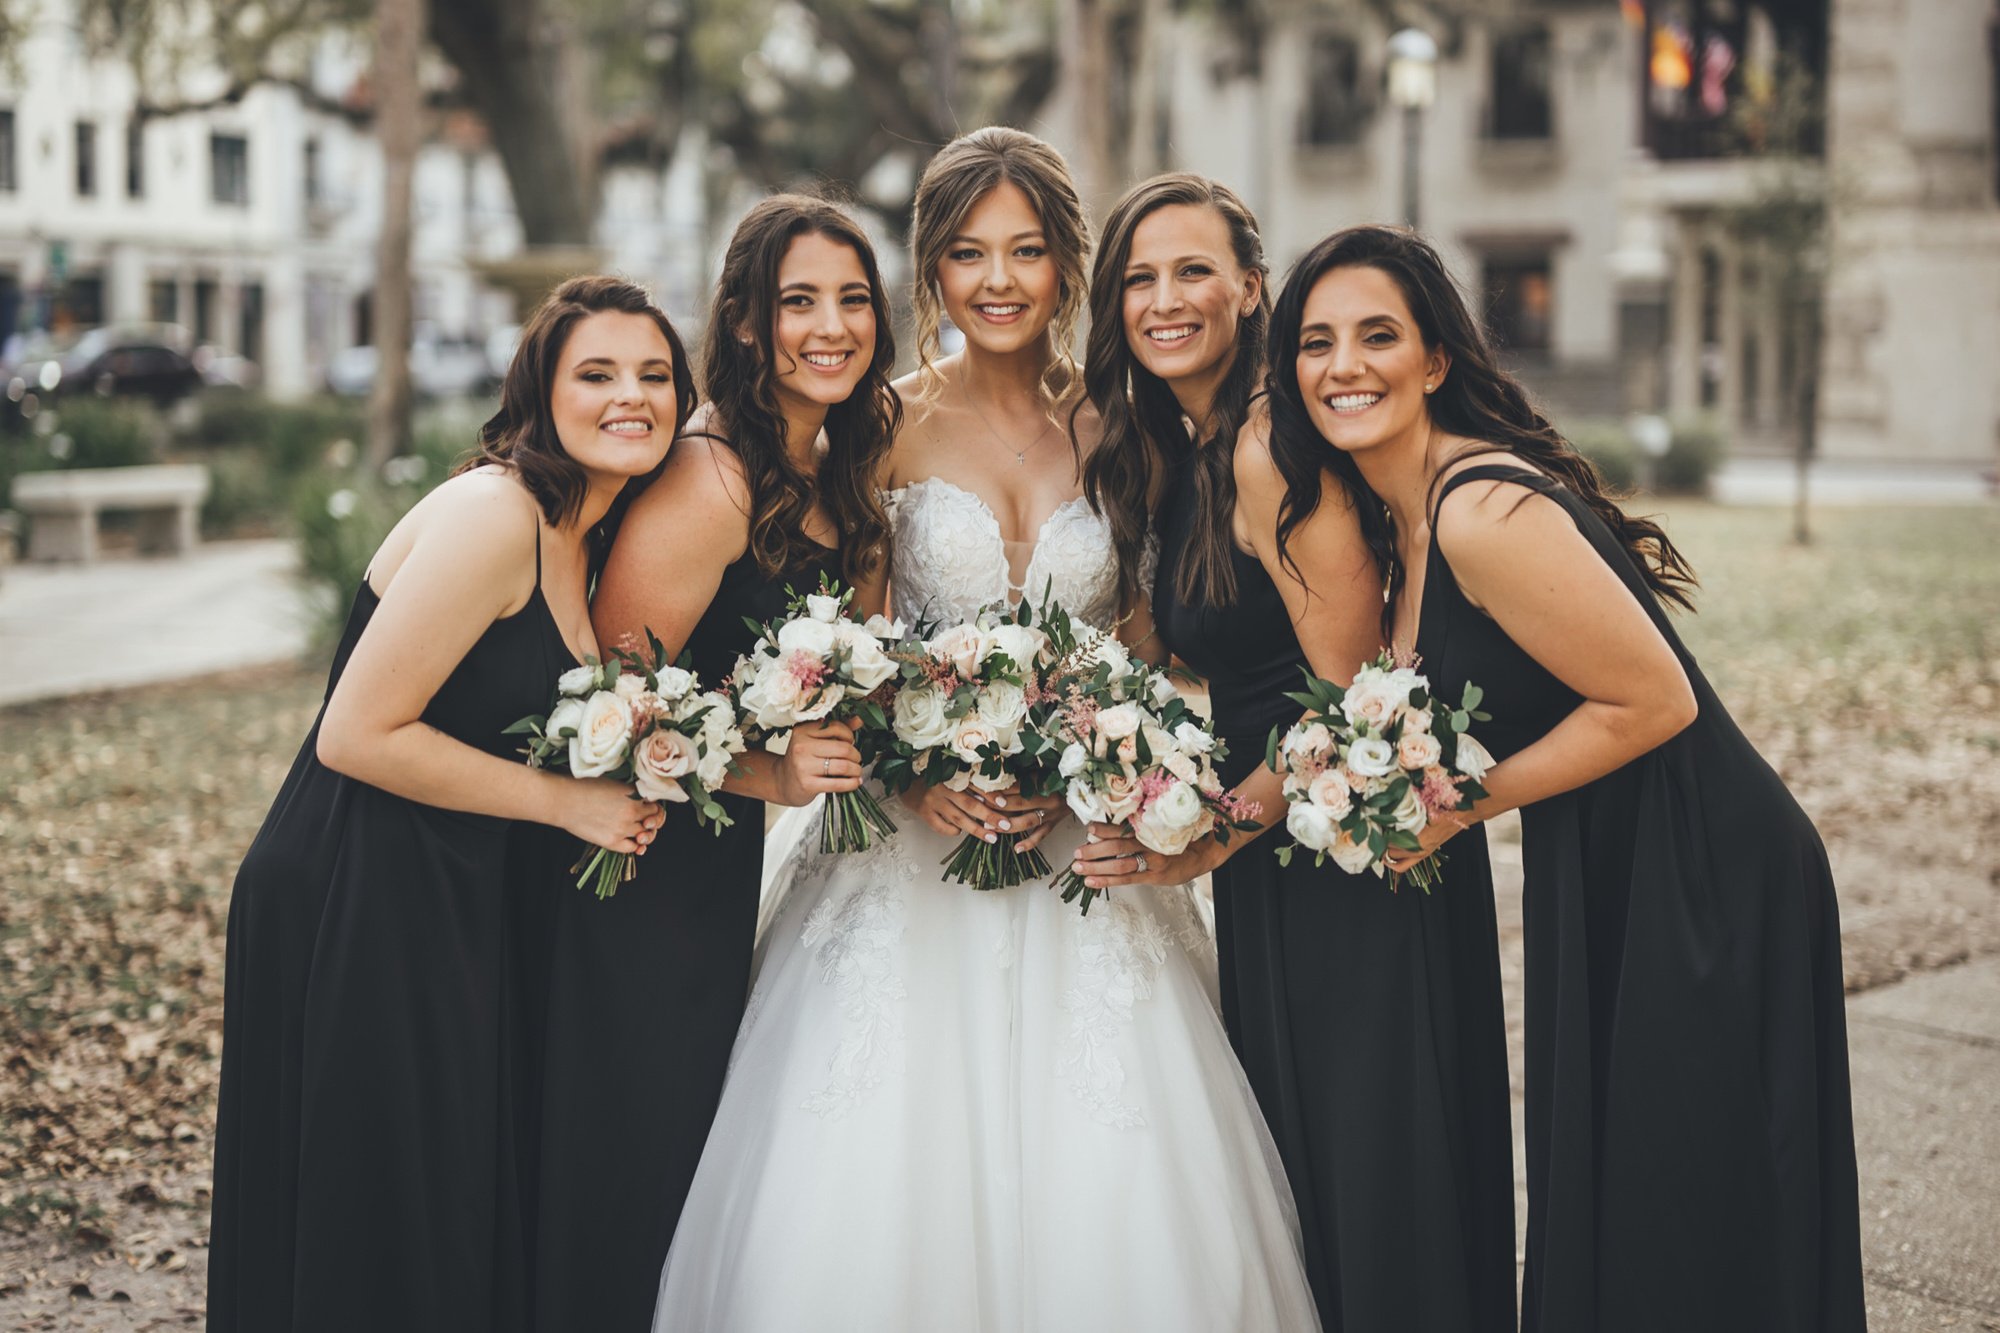 Bow Tie Photo & Video bride with her bridesmaids for bridal party photos at Treasury on the Plaza in St. Augustine, FL.jpg